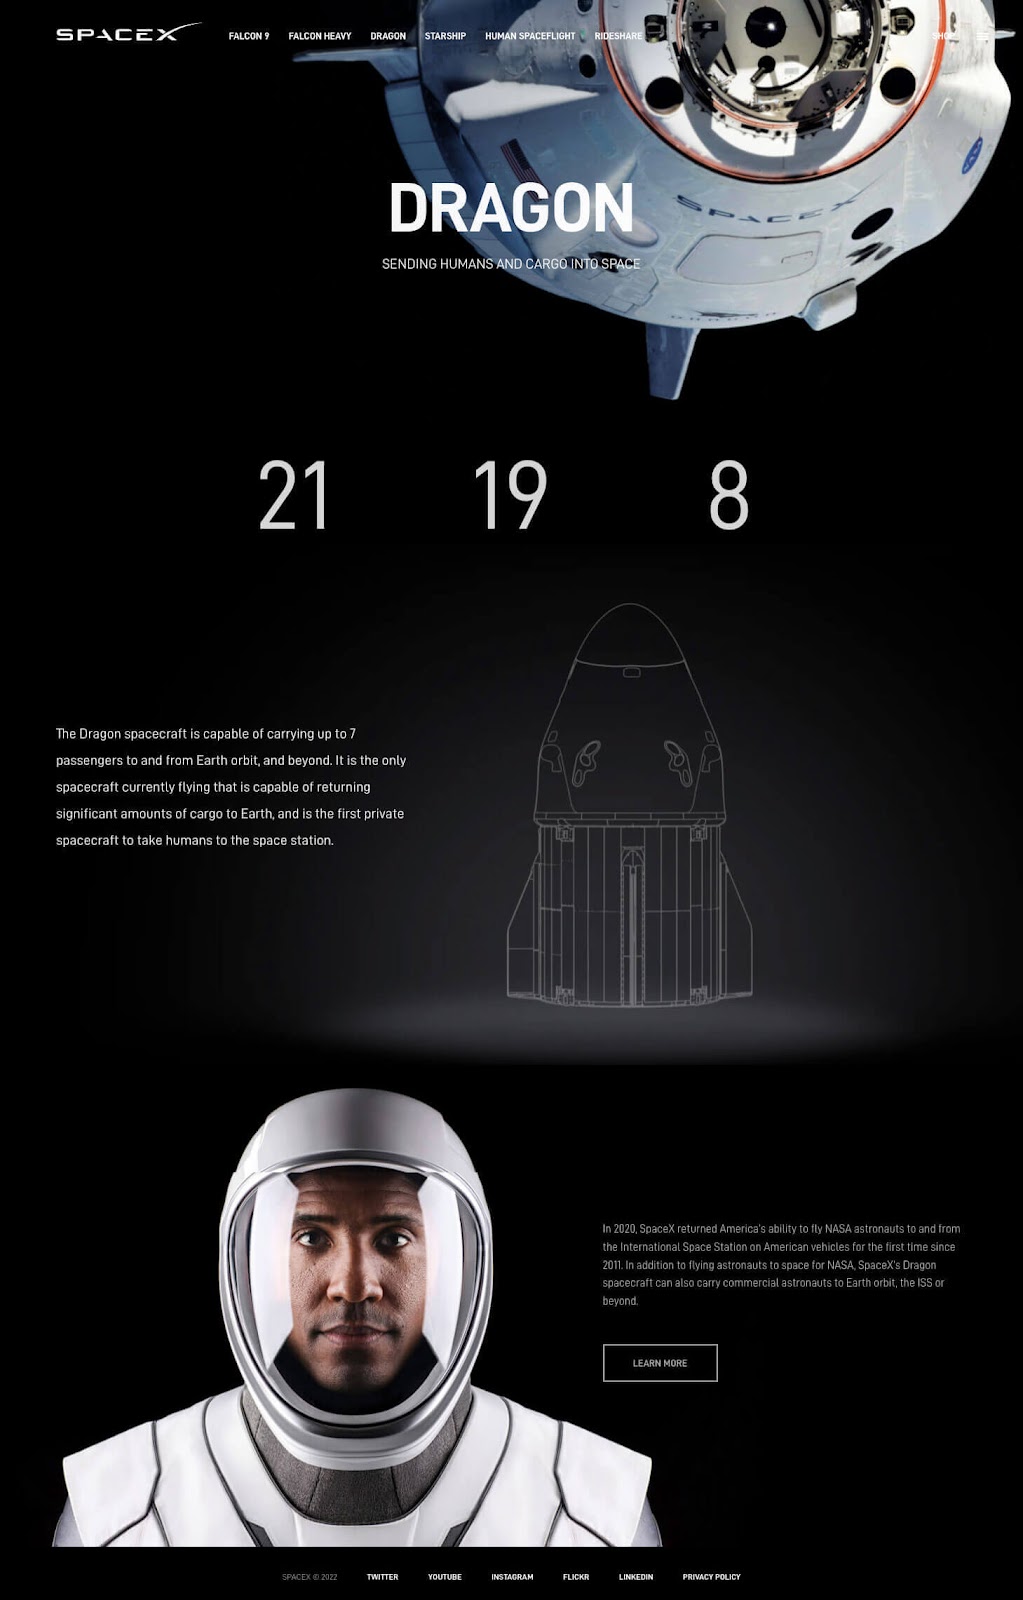 Screengrab of SpaceX's black background webpage about its Dragon program